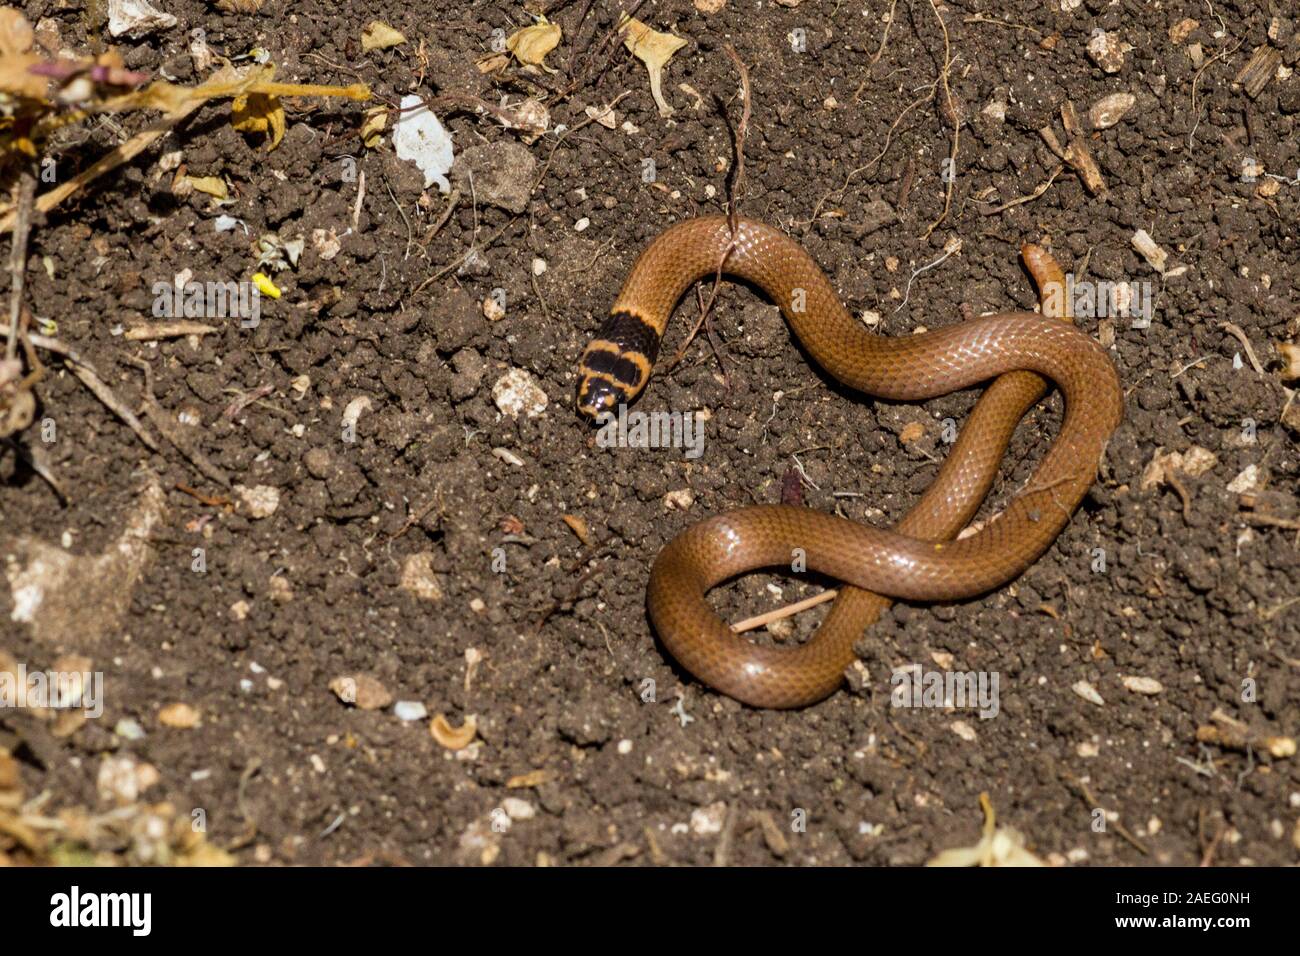 Eirenis rothii is a species of snake of the family Colubridae. It is commonly known as the Roth's dwarf racer. Photographed in Israel Stock Photo